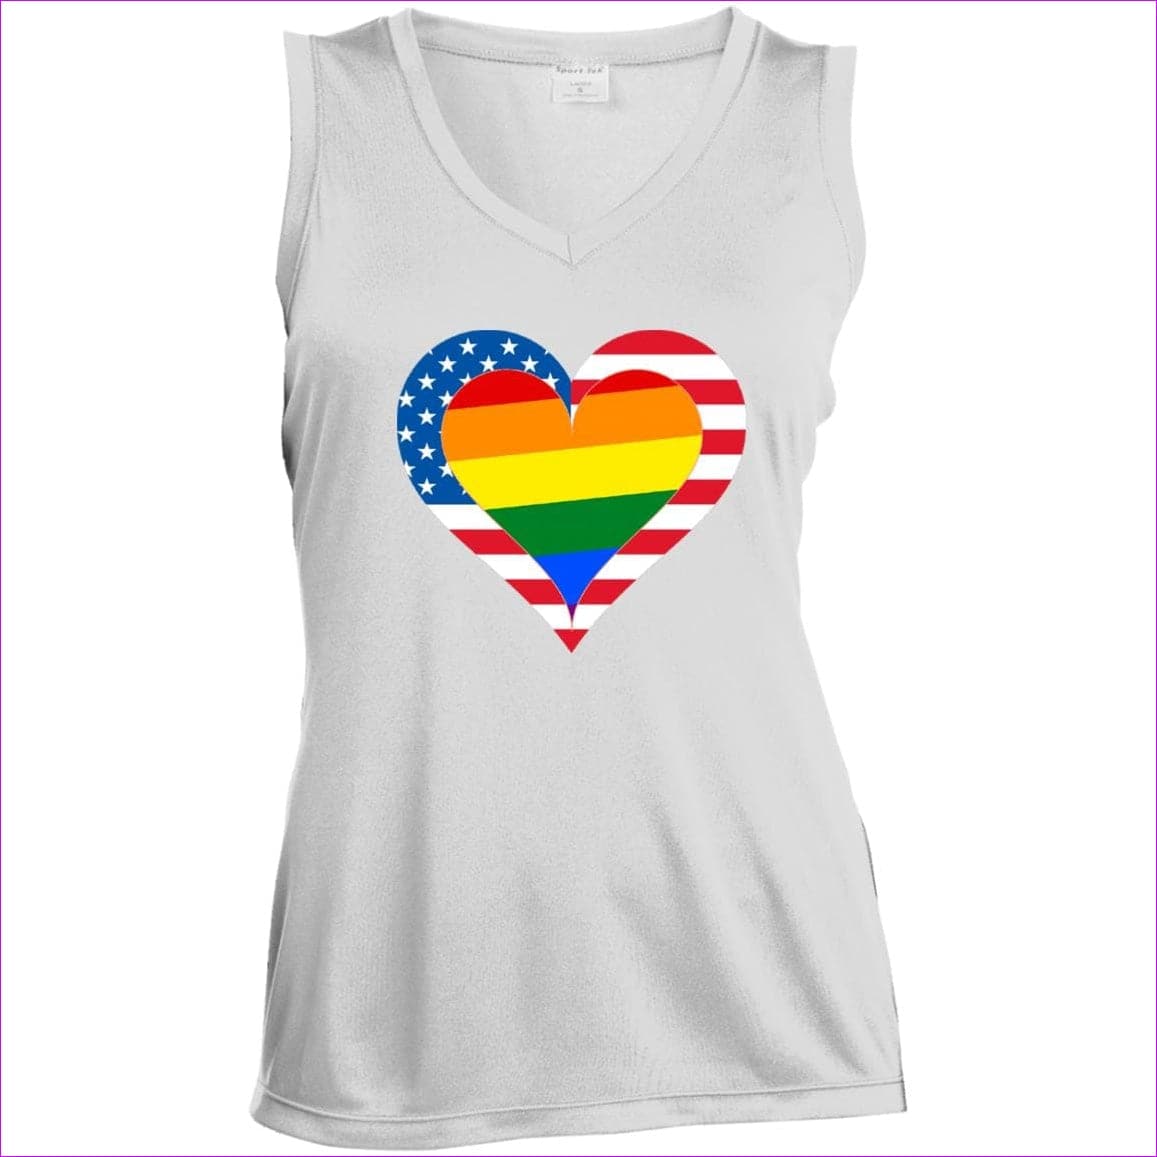 White Country & Pride Love Ladies' Sleeveless V-Neck Performance Tee - women's tank top at TFC&H Co.